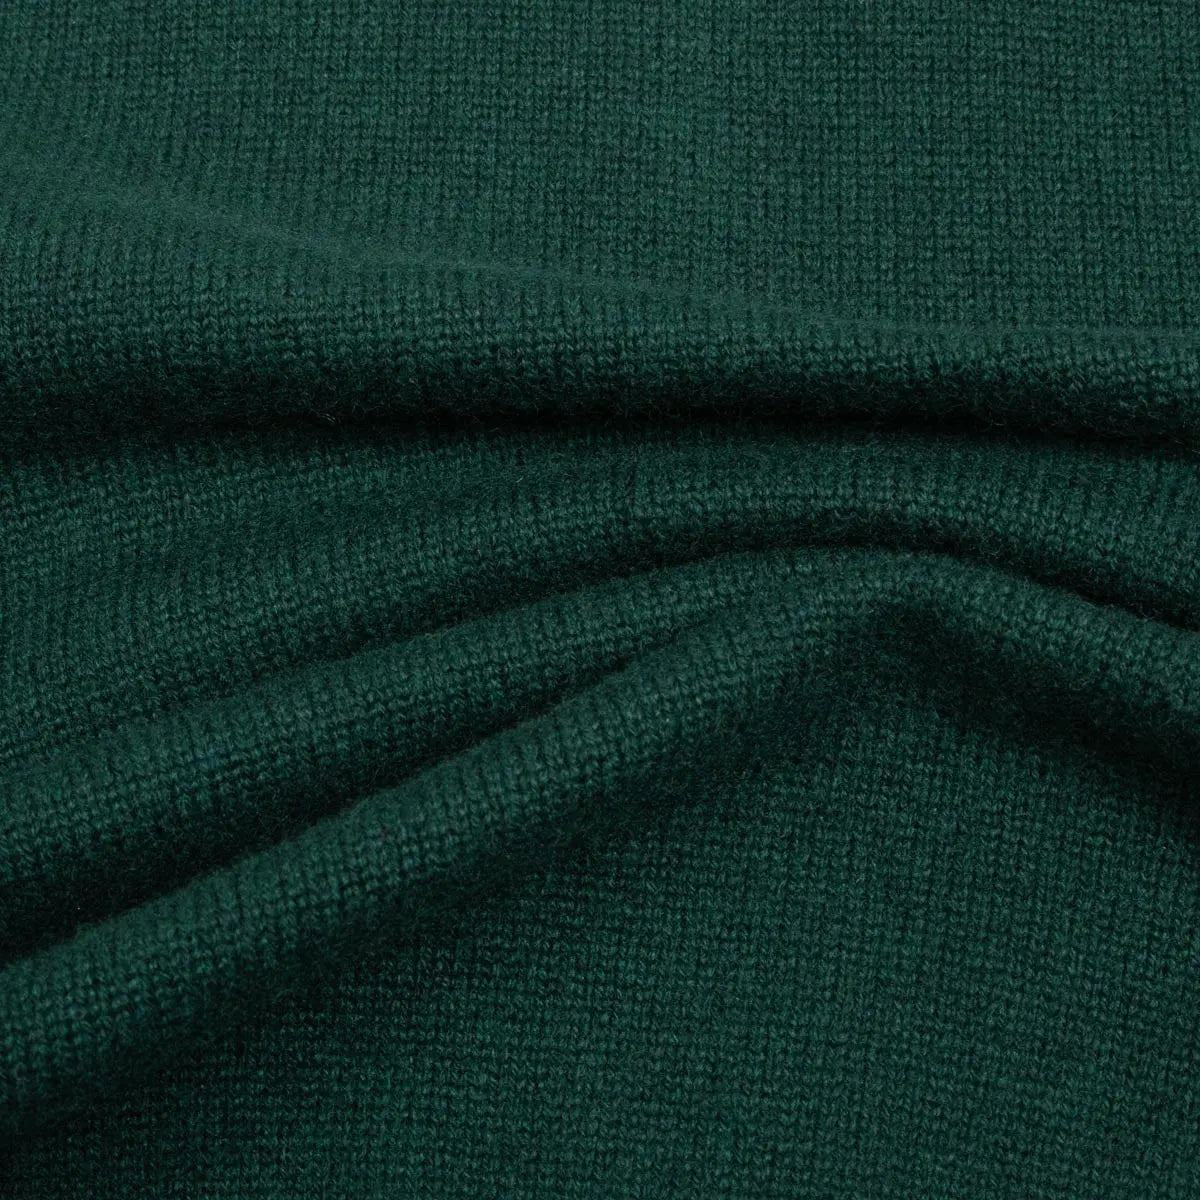 Holly Green Tiree 4ply Crew Neck Cashmere Sweater Robert Old